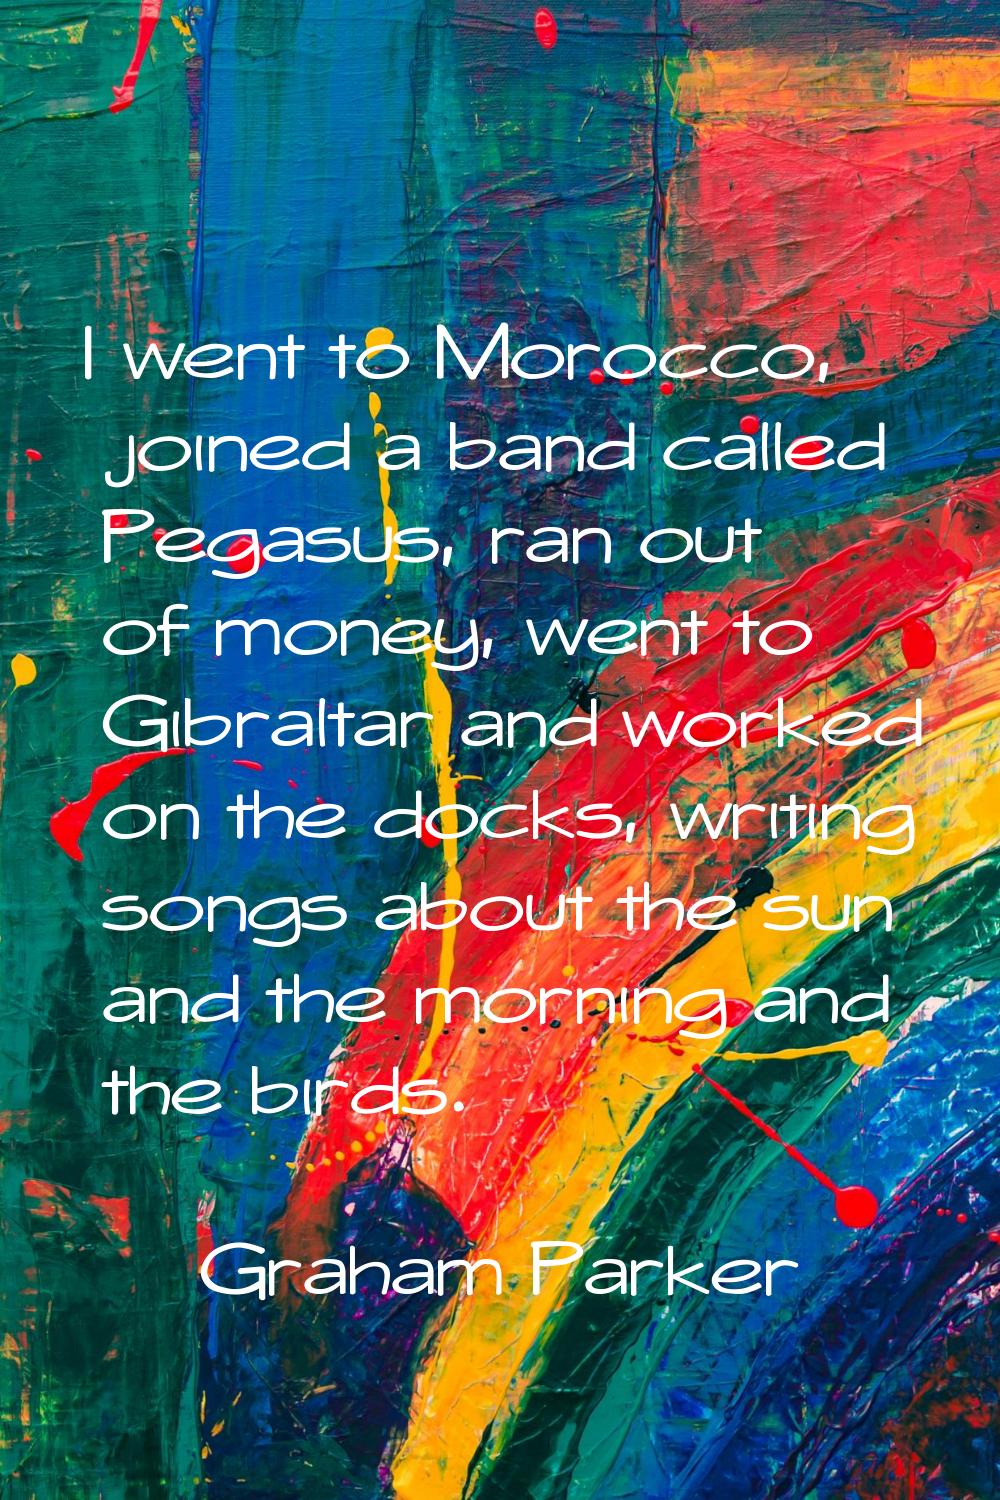 I went to Morocco, joined a band called Pegasus, ran out of money, went to Gibraltar and worked on 